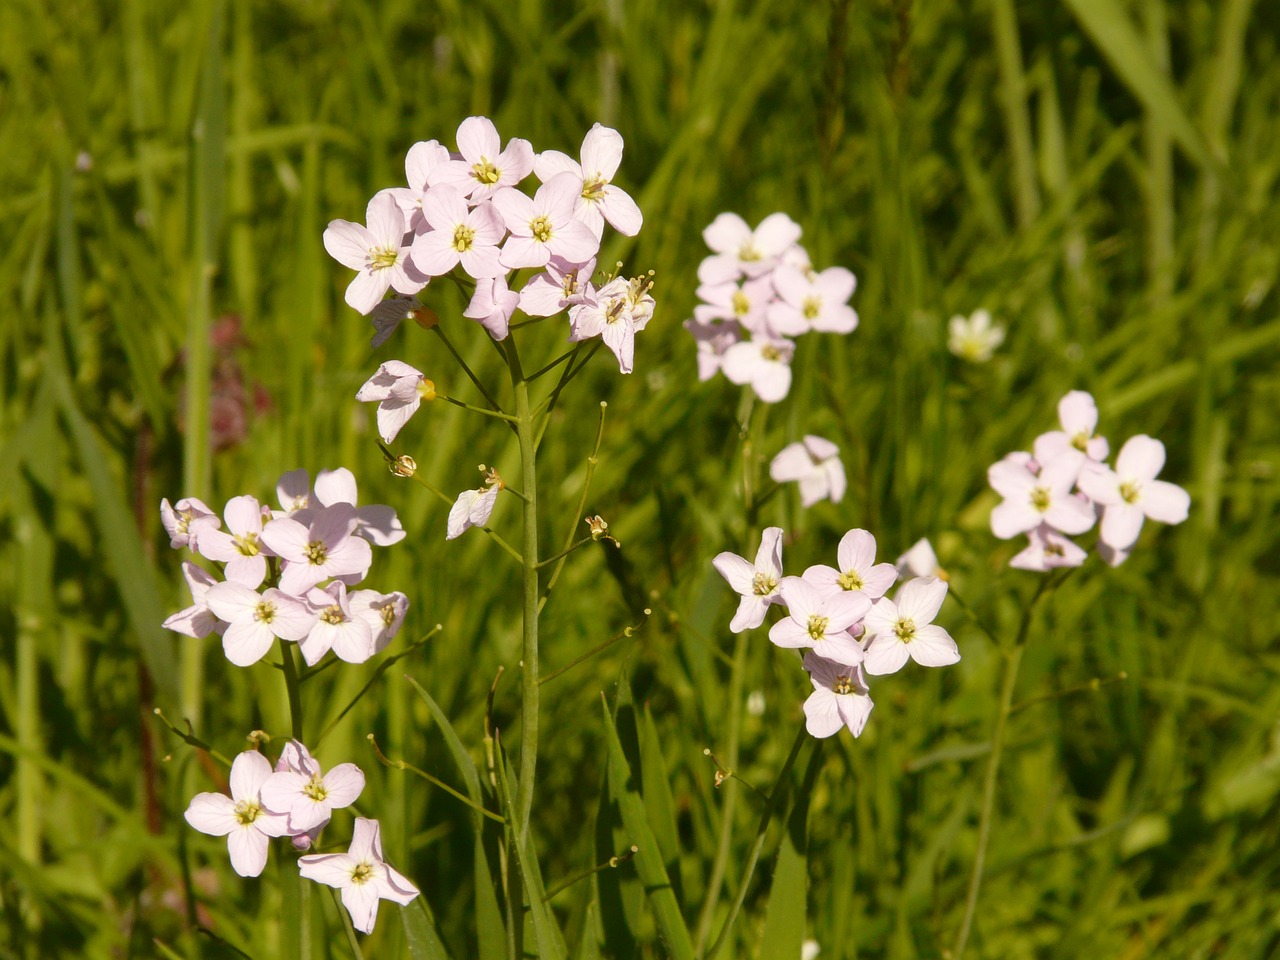 cuckoo flower pointed flower card amines pratensis free photo